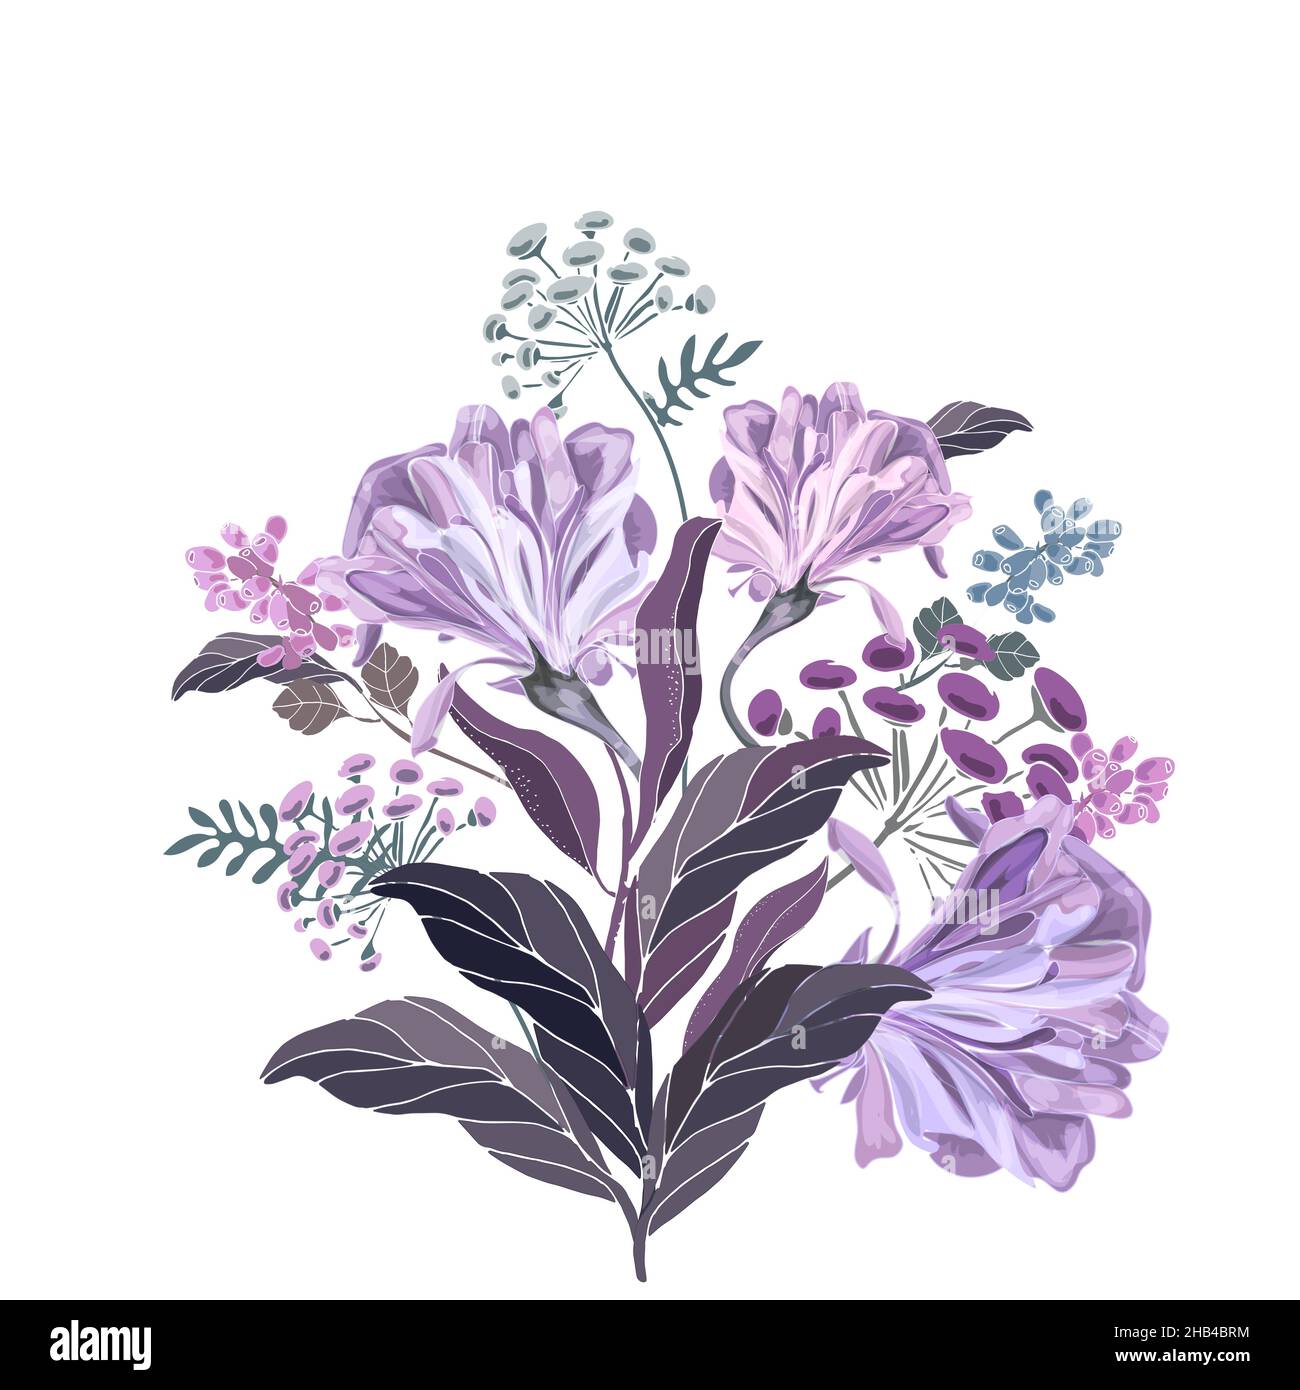 Vector floral illustration. Bouquet of lilac and purple flowers on a white background. Stock Vector